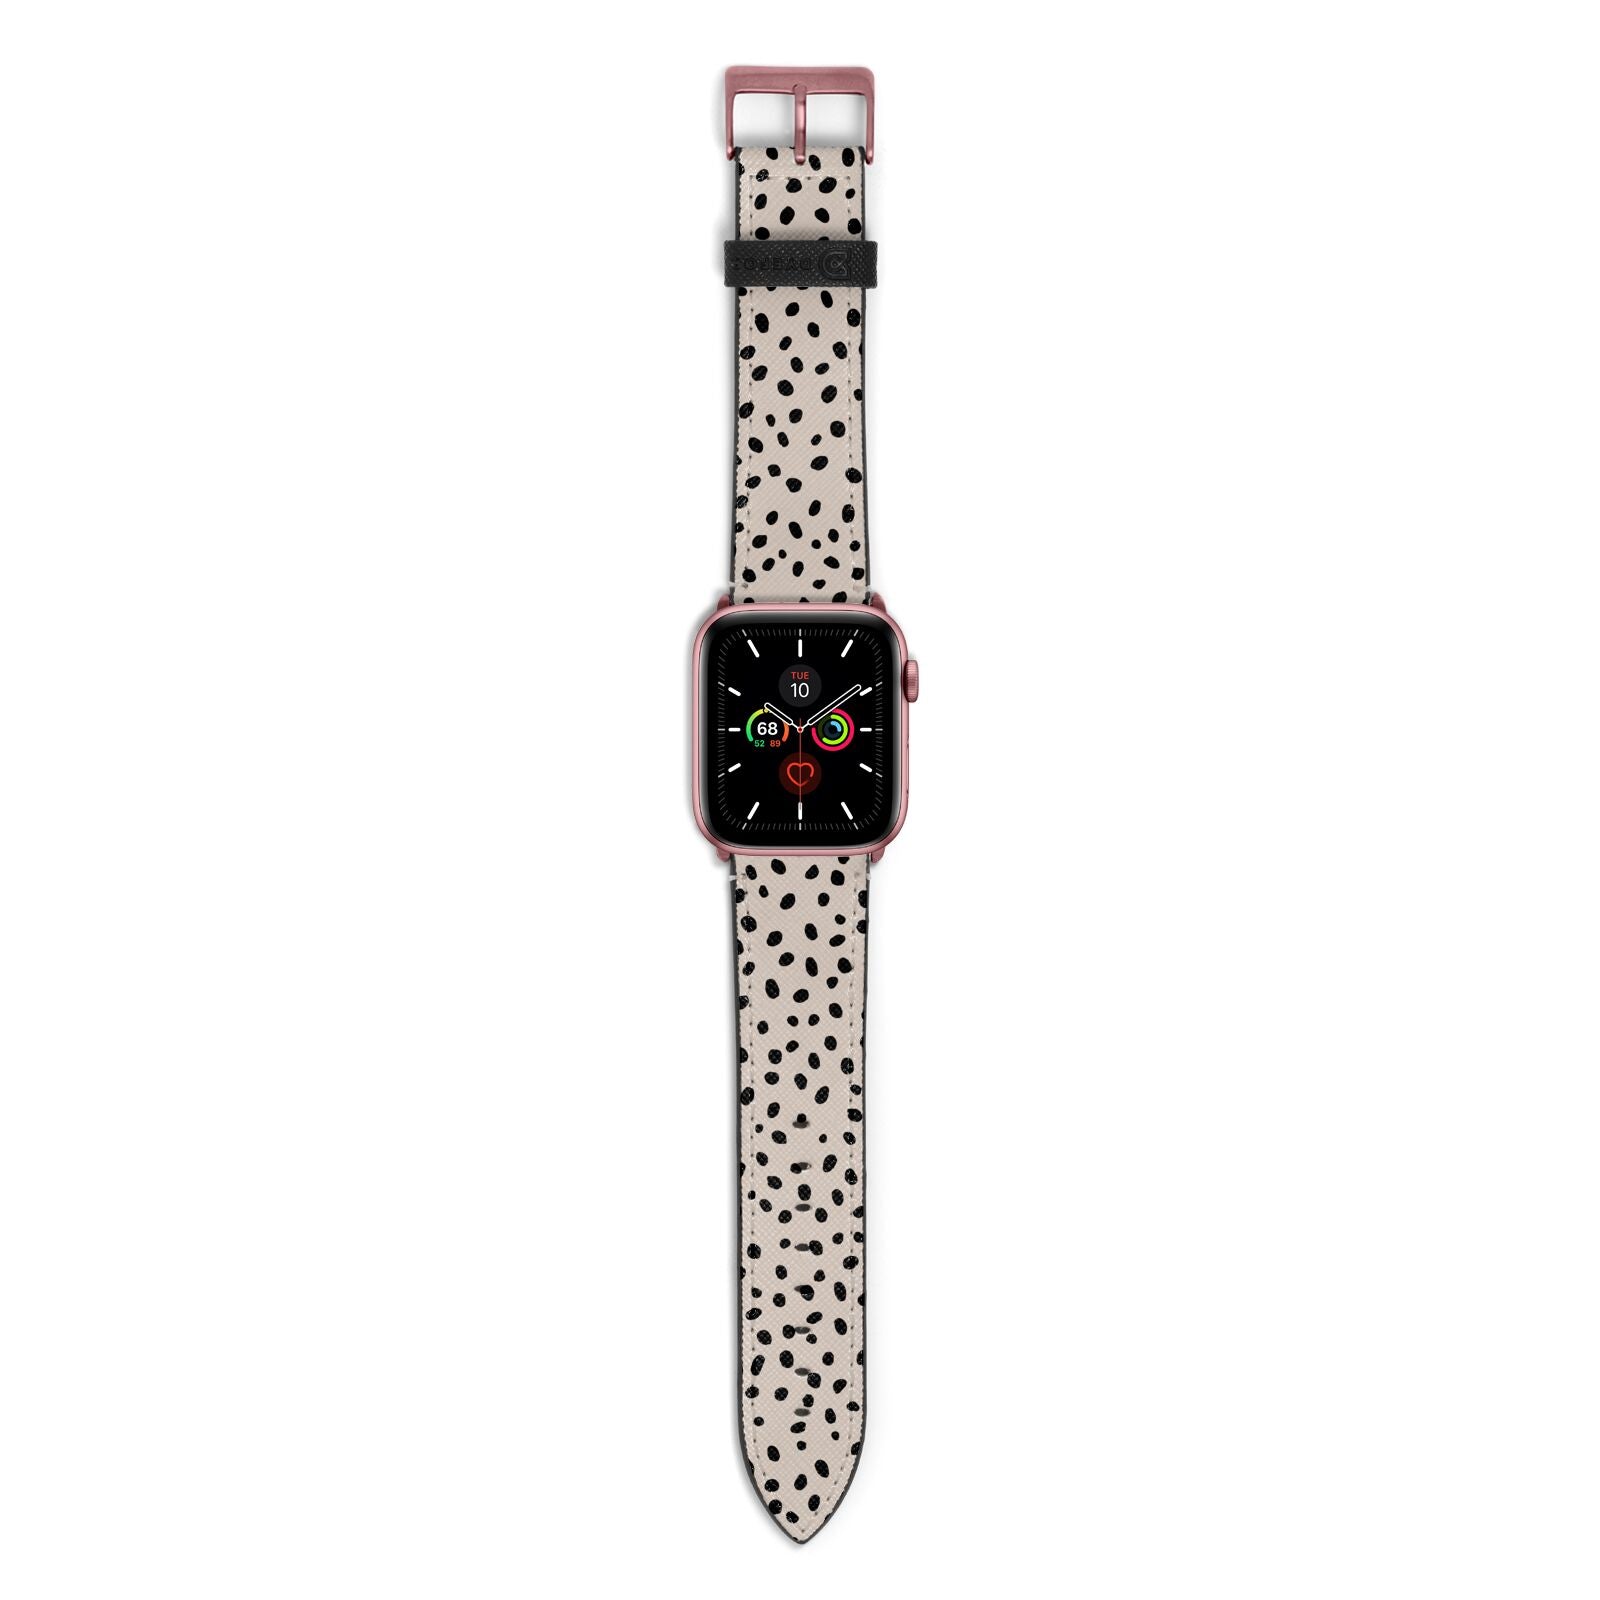 Almond Polka Dot Apple Watch Strap with Rose Gold Hardware